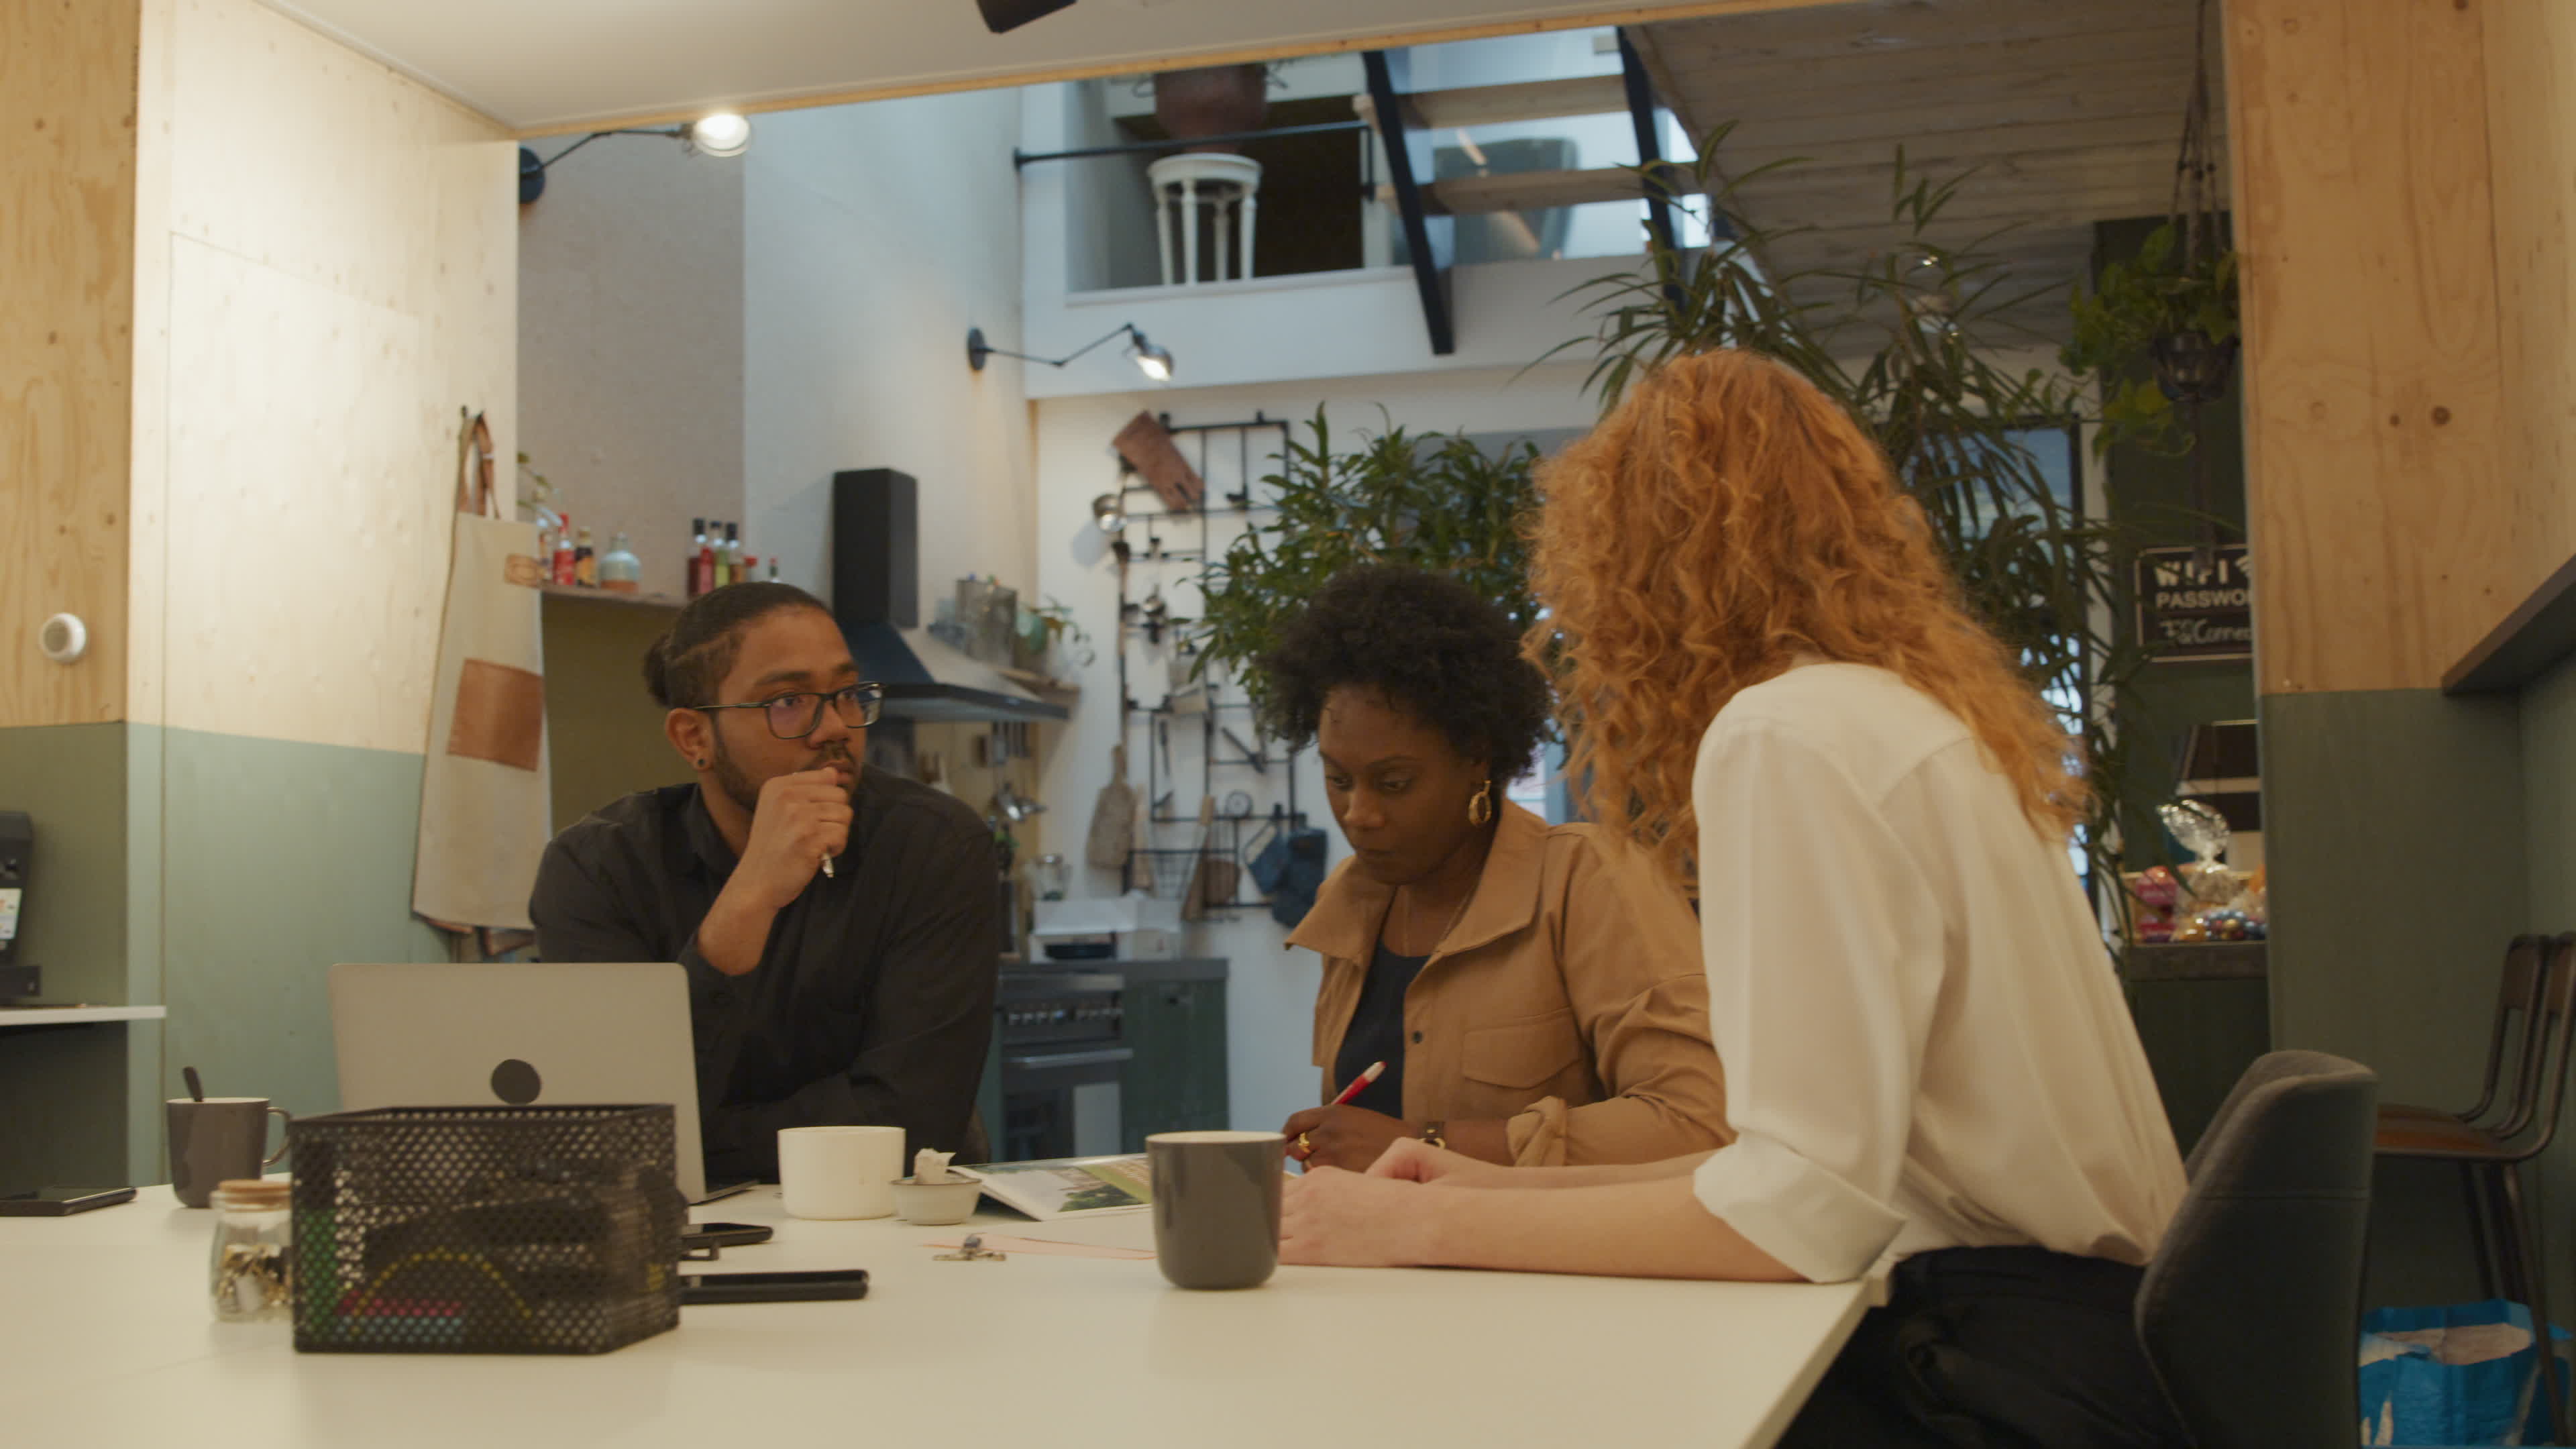 Black mature woman, white young woman and black man wearing glasses, sitting at table in office, talking, white woman gestures